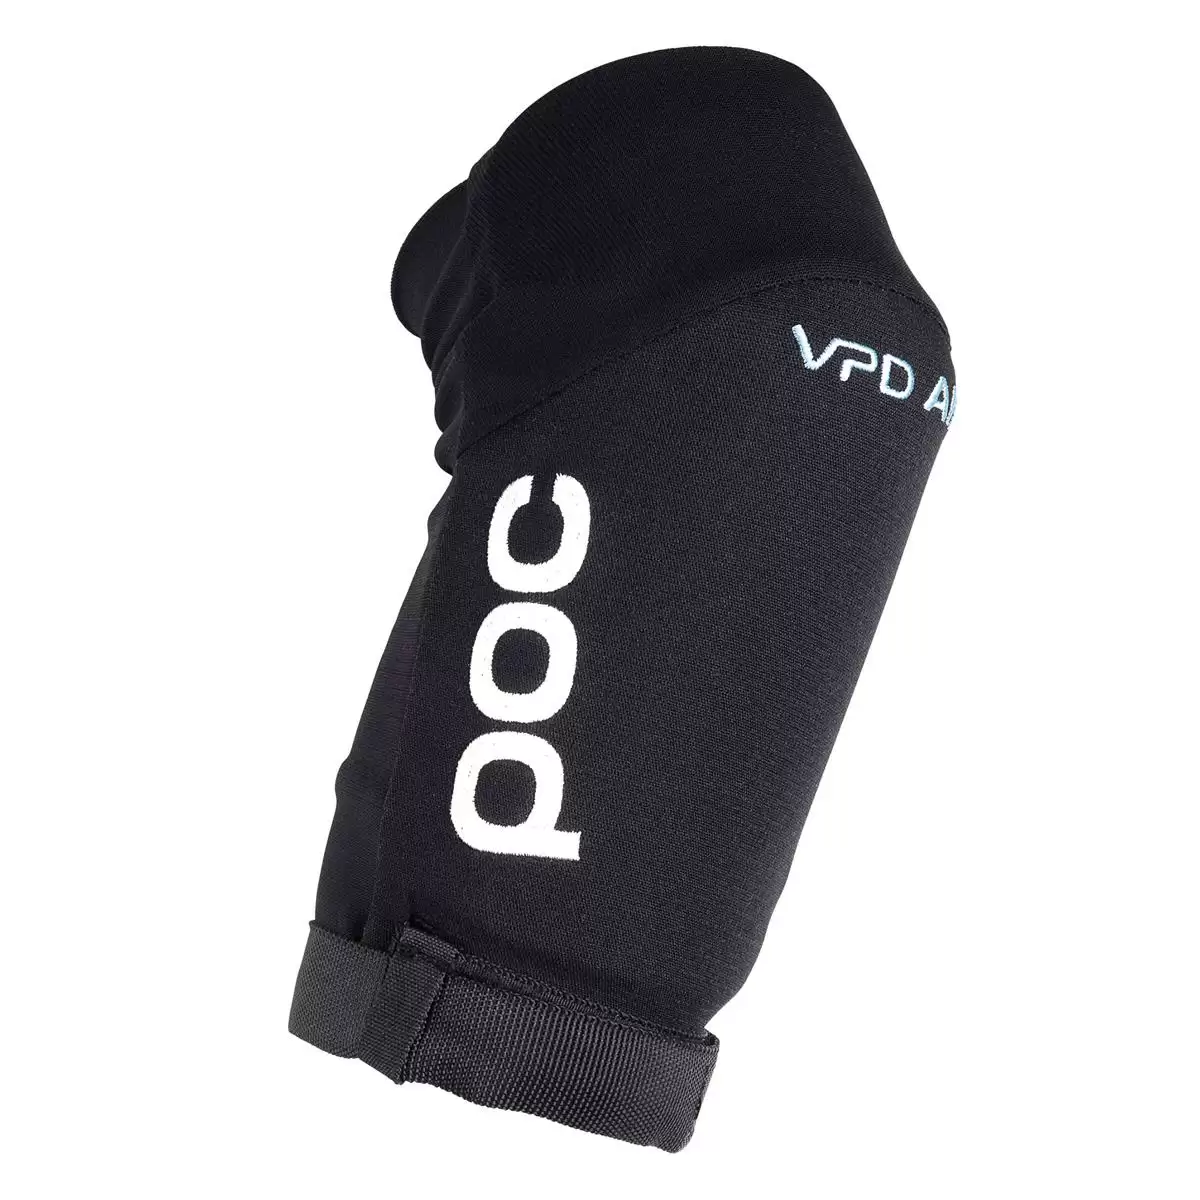 Joint VPD Air Elbow pads black size S - image